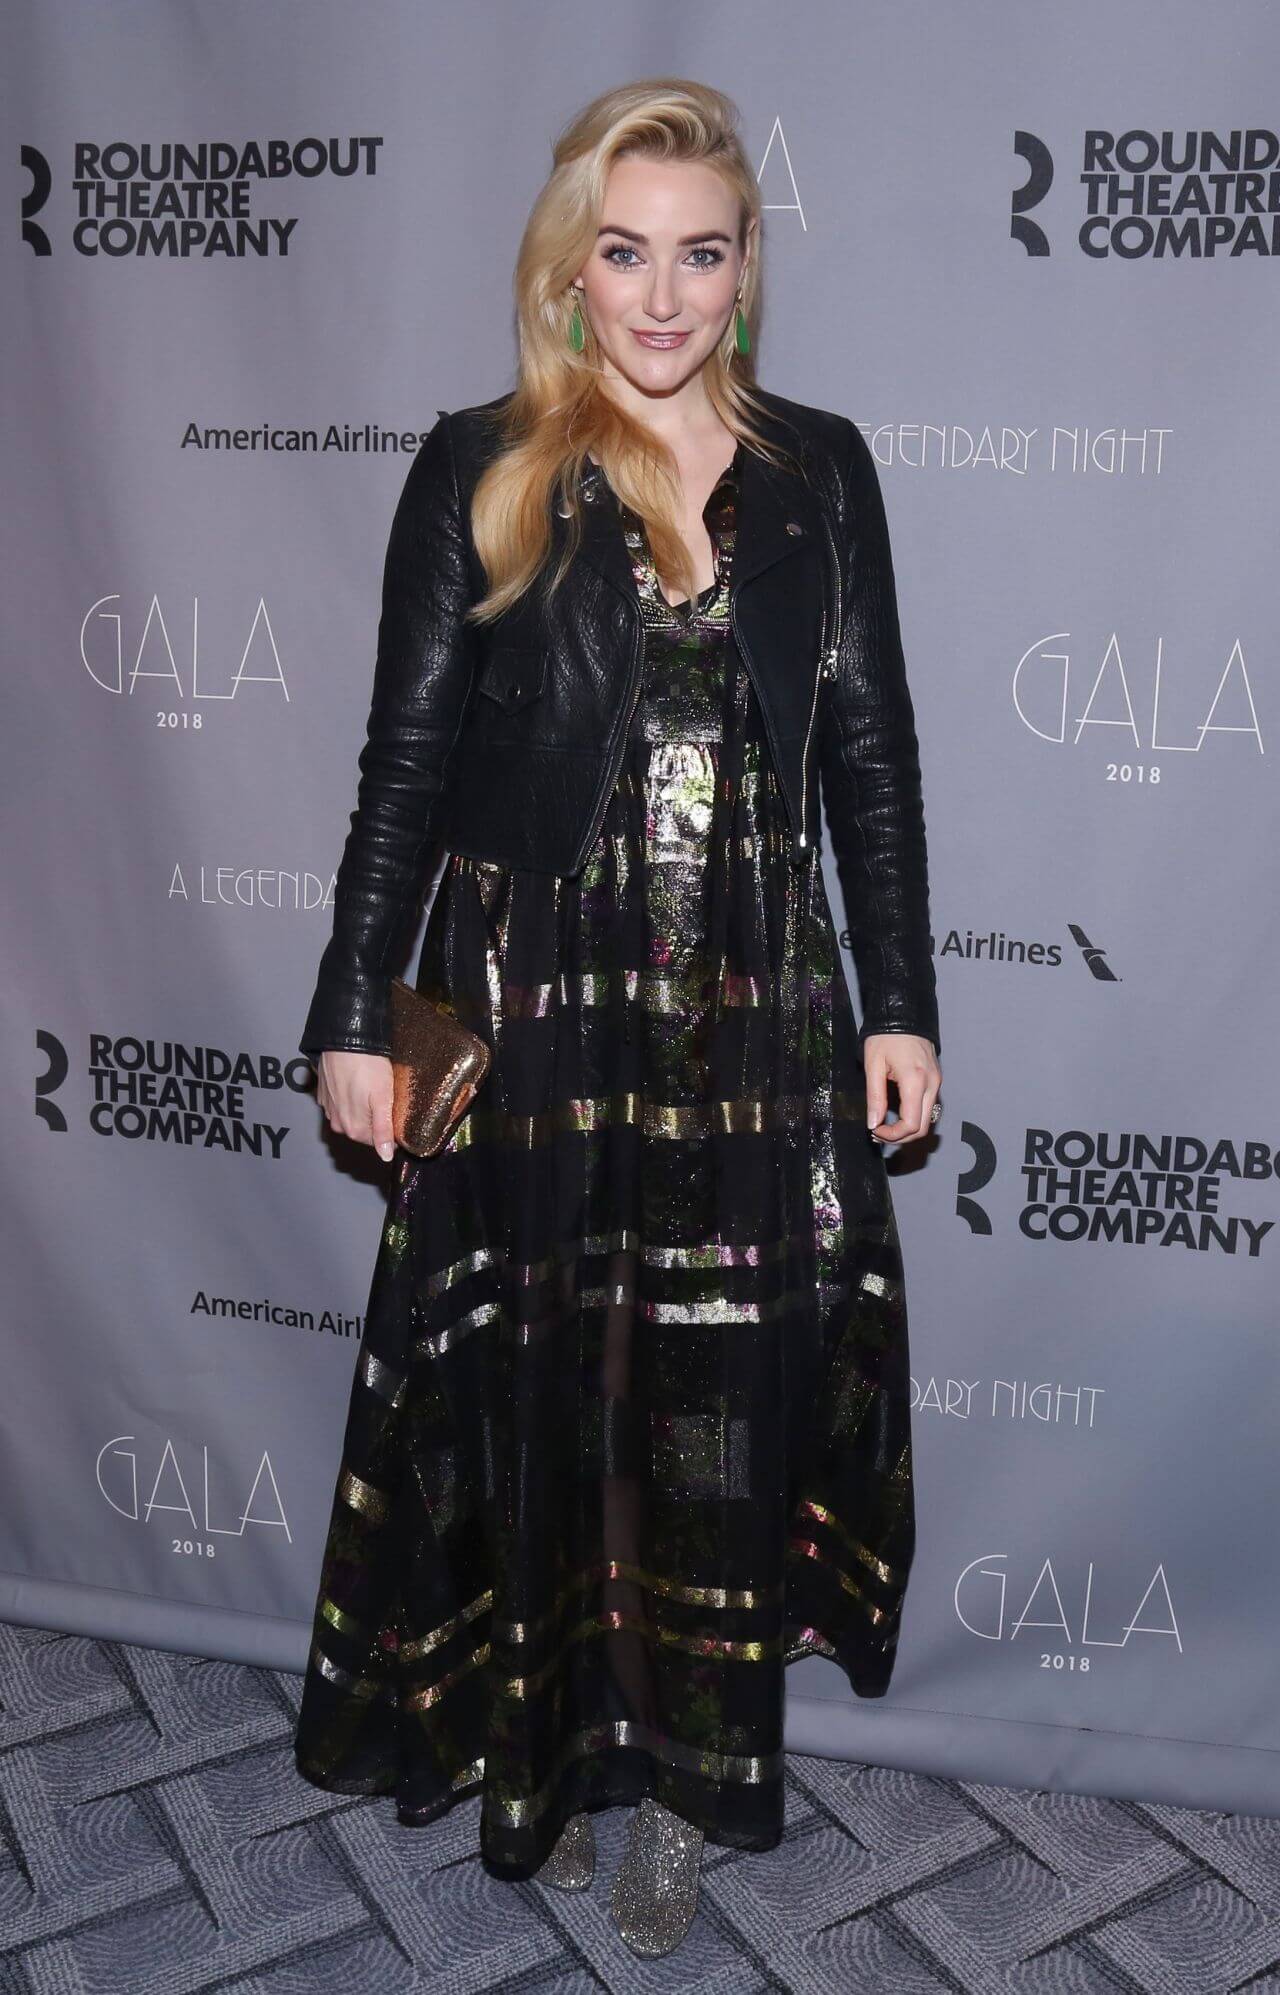 Betsy Wolfe In Black Printed shimmery Long Gown With Leather Jacket At Roundabout Theatre Company Gala in New York